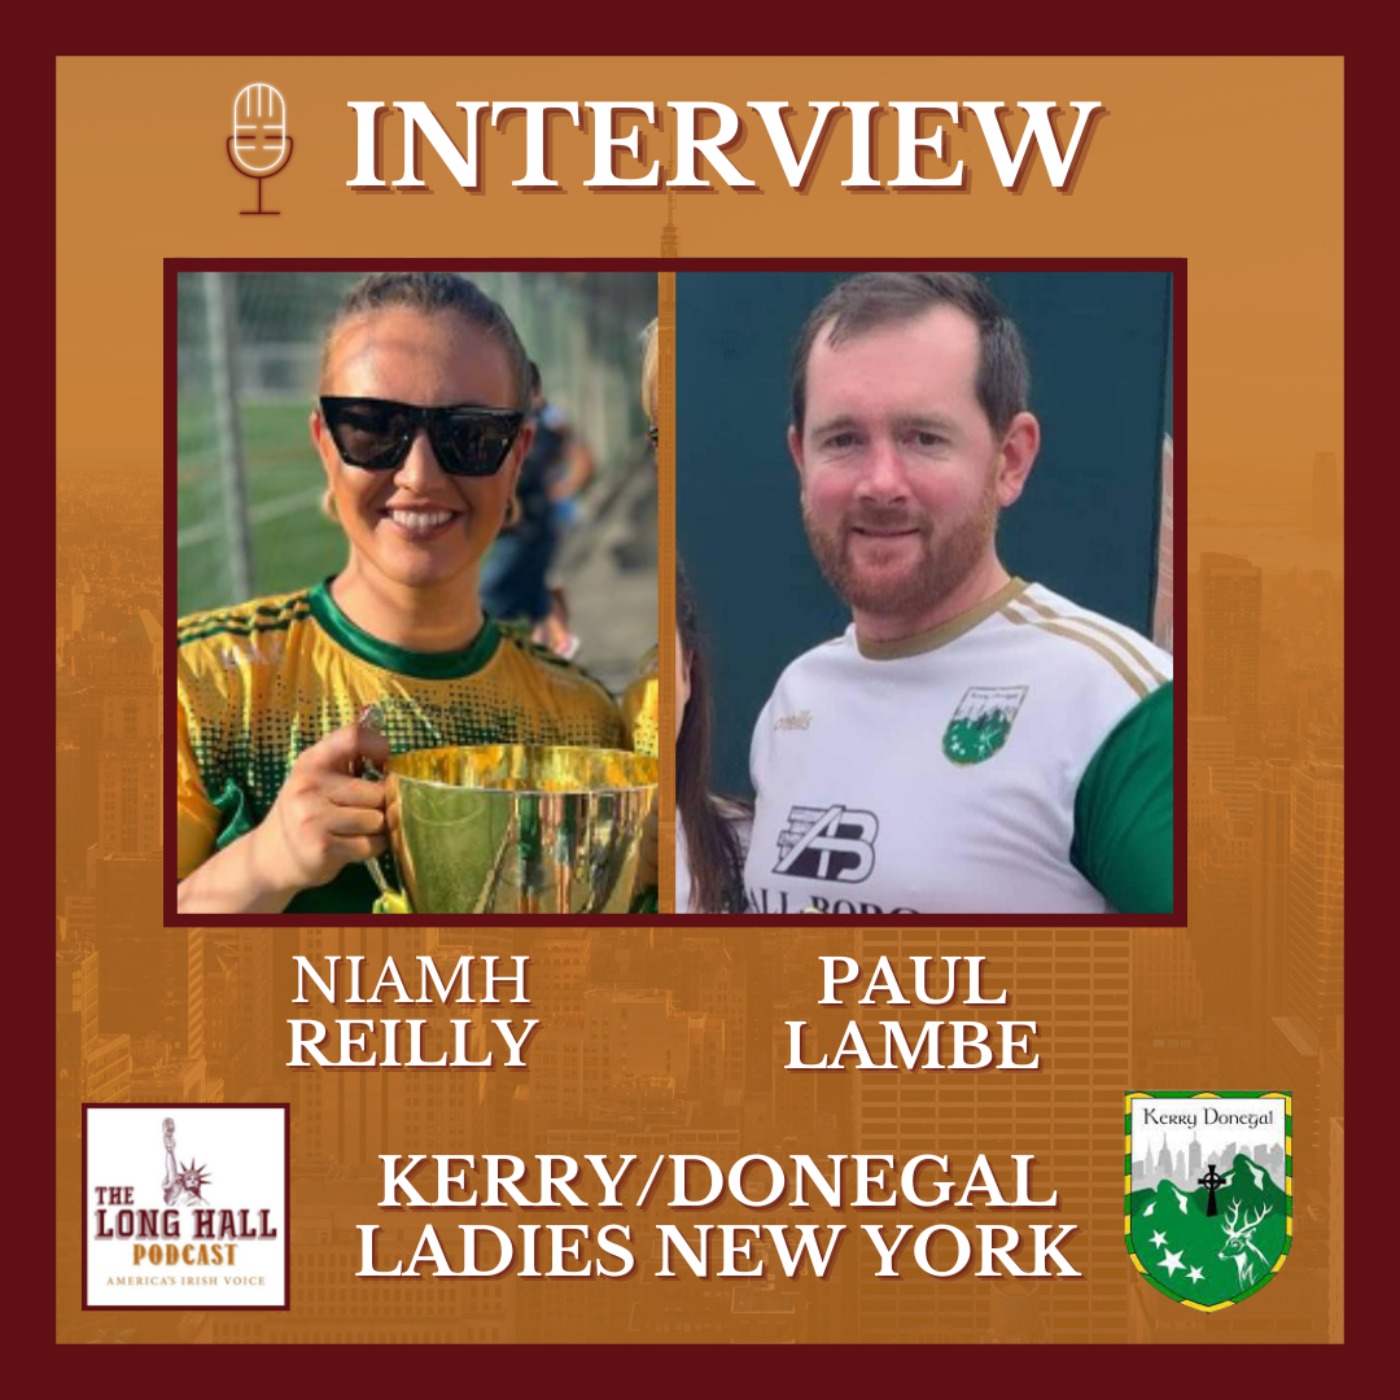 POST-MATCH INTERVIEW: Kerry/Donegal Manager Paul Lambe & Niamh Reilly